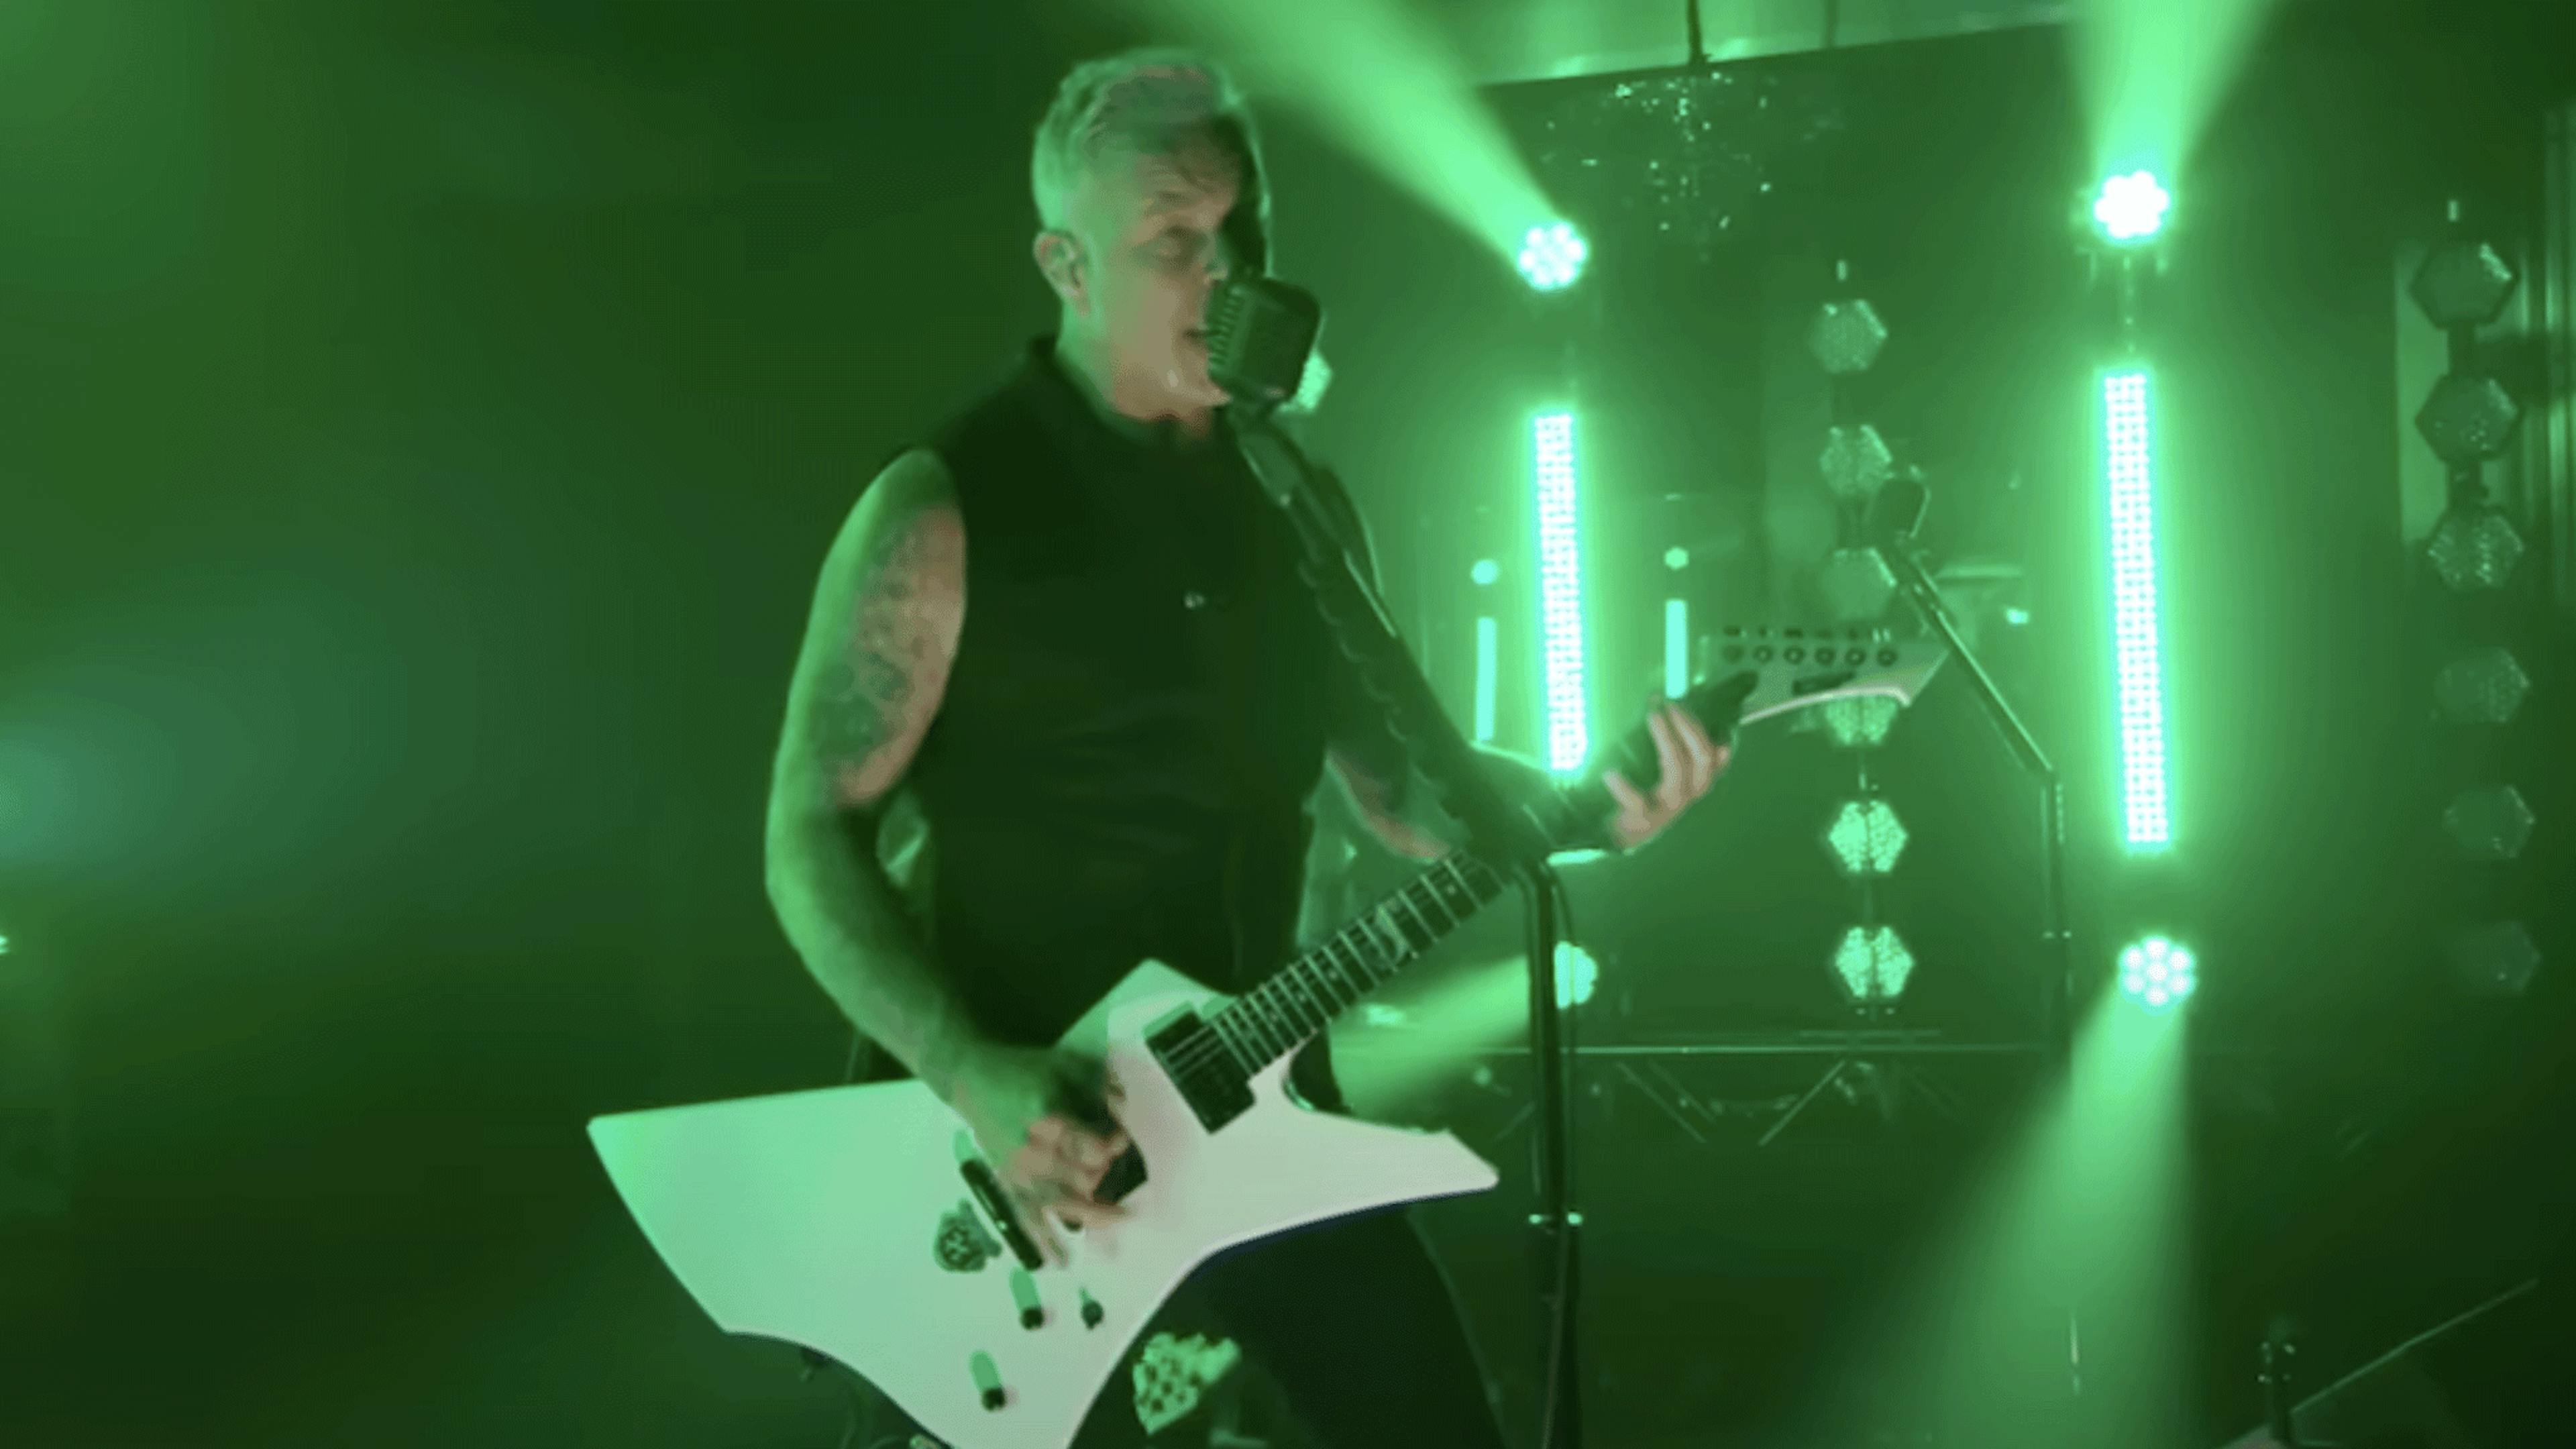 Watch Metallica’s awesome performance of Holier Than Thou on Jimmy Kimmel